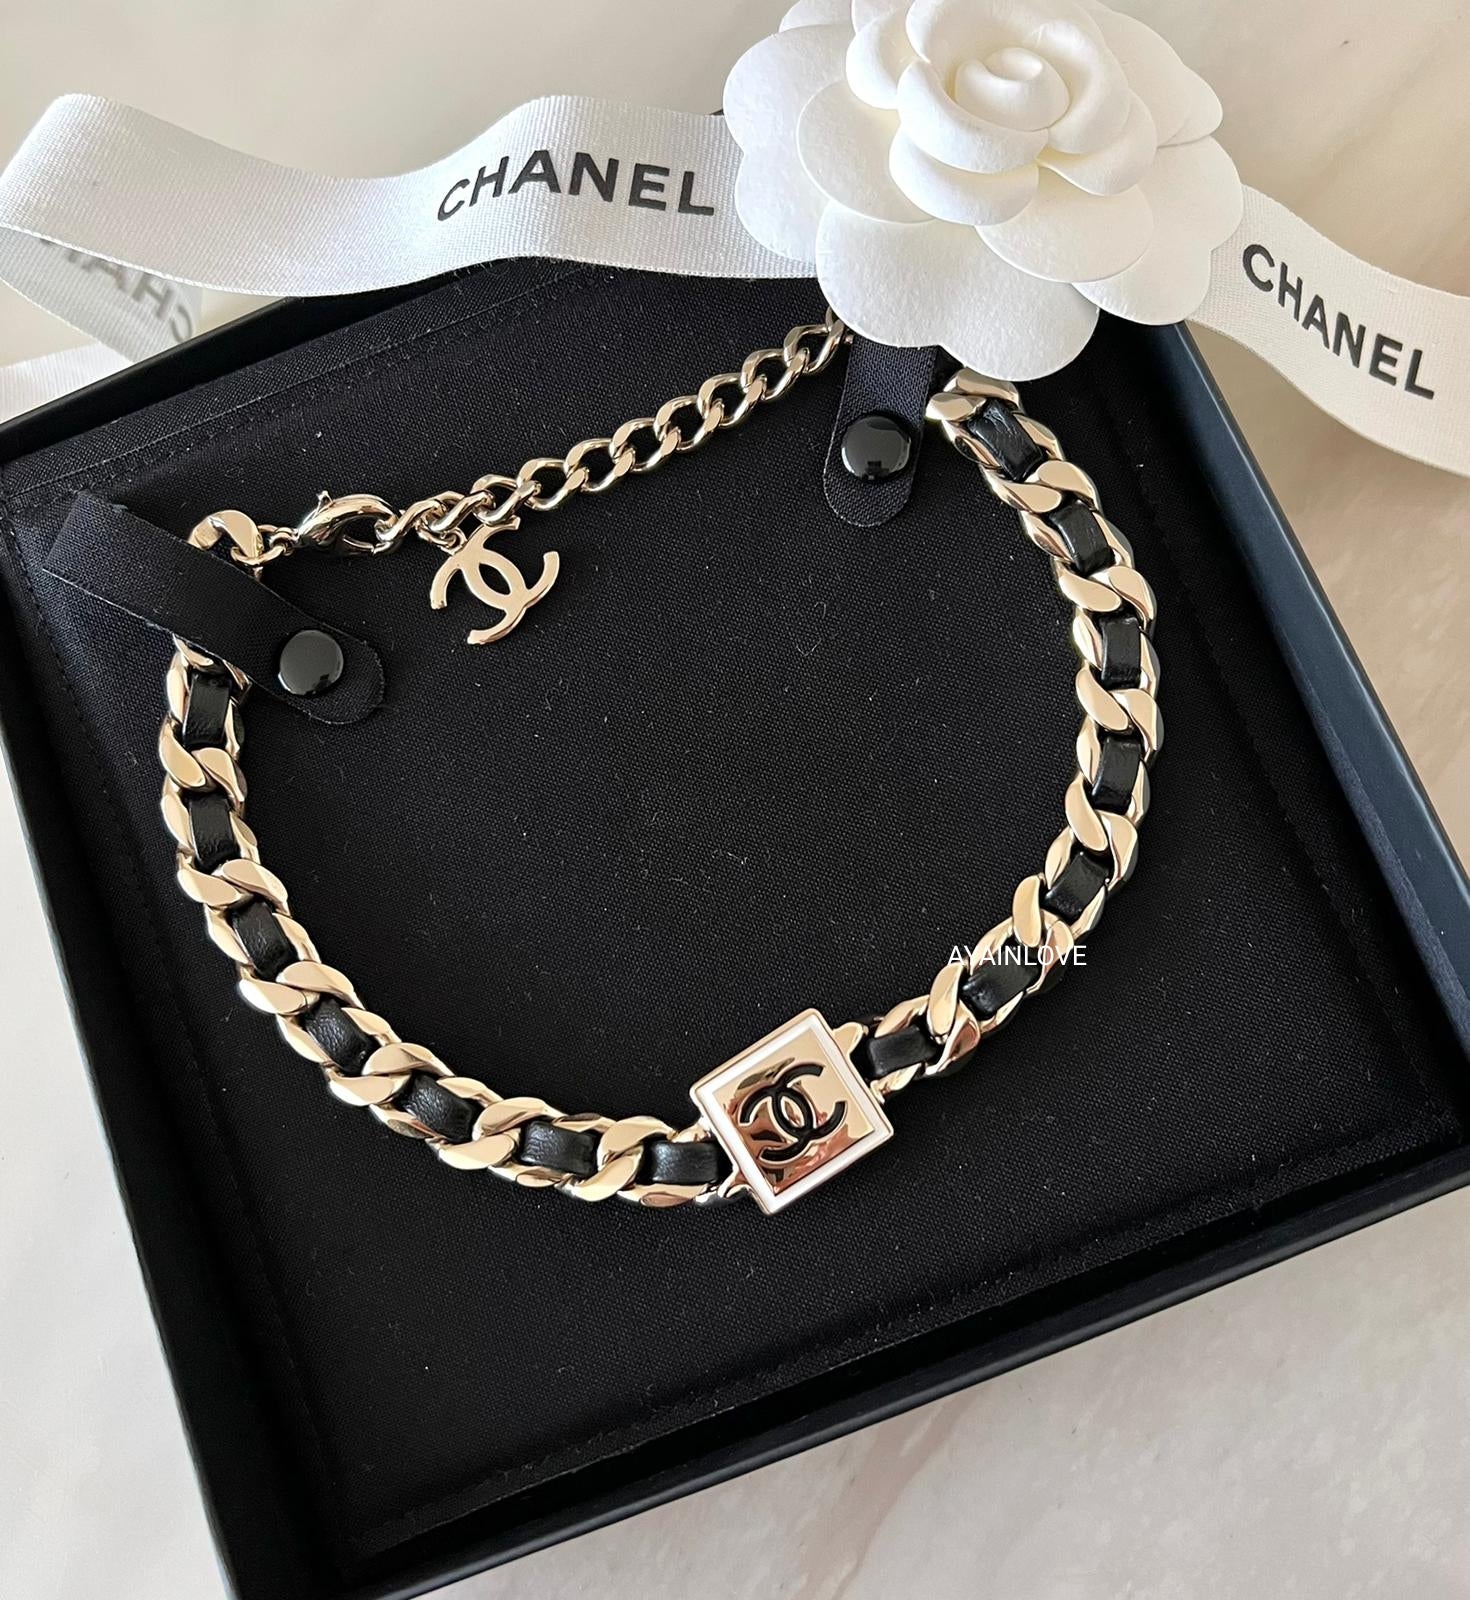 Discover a Chanel Bracelet in Iconic Brand Motifs, Handbags and Accessories